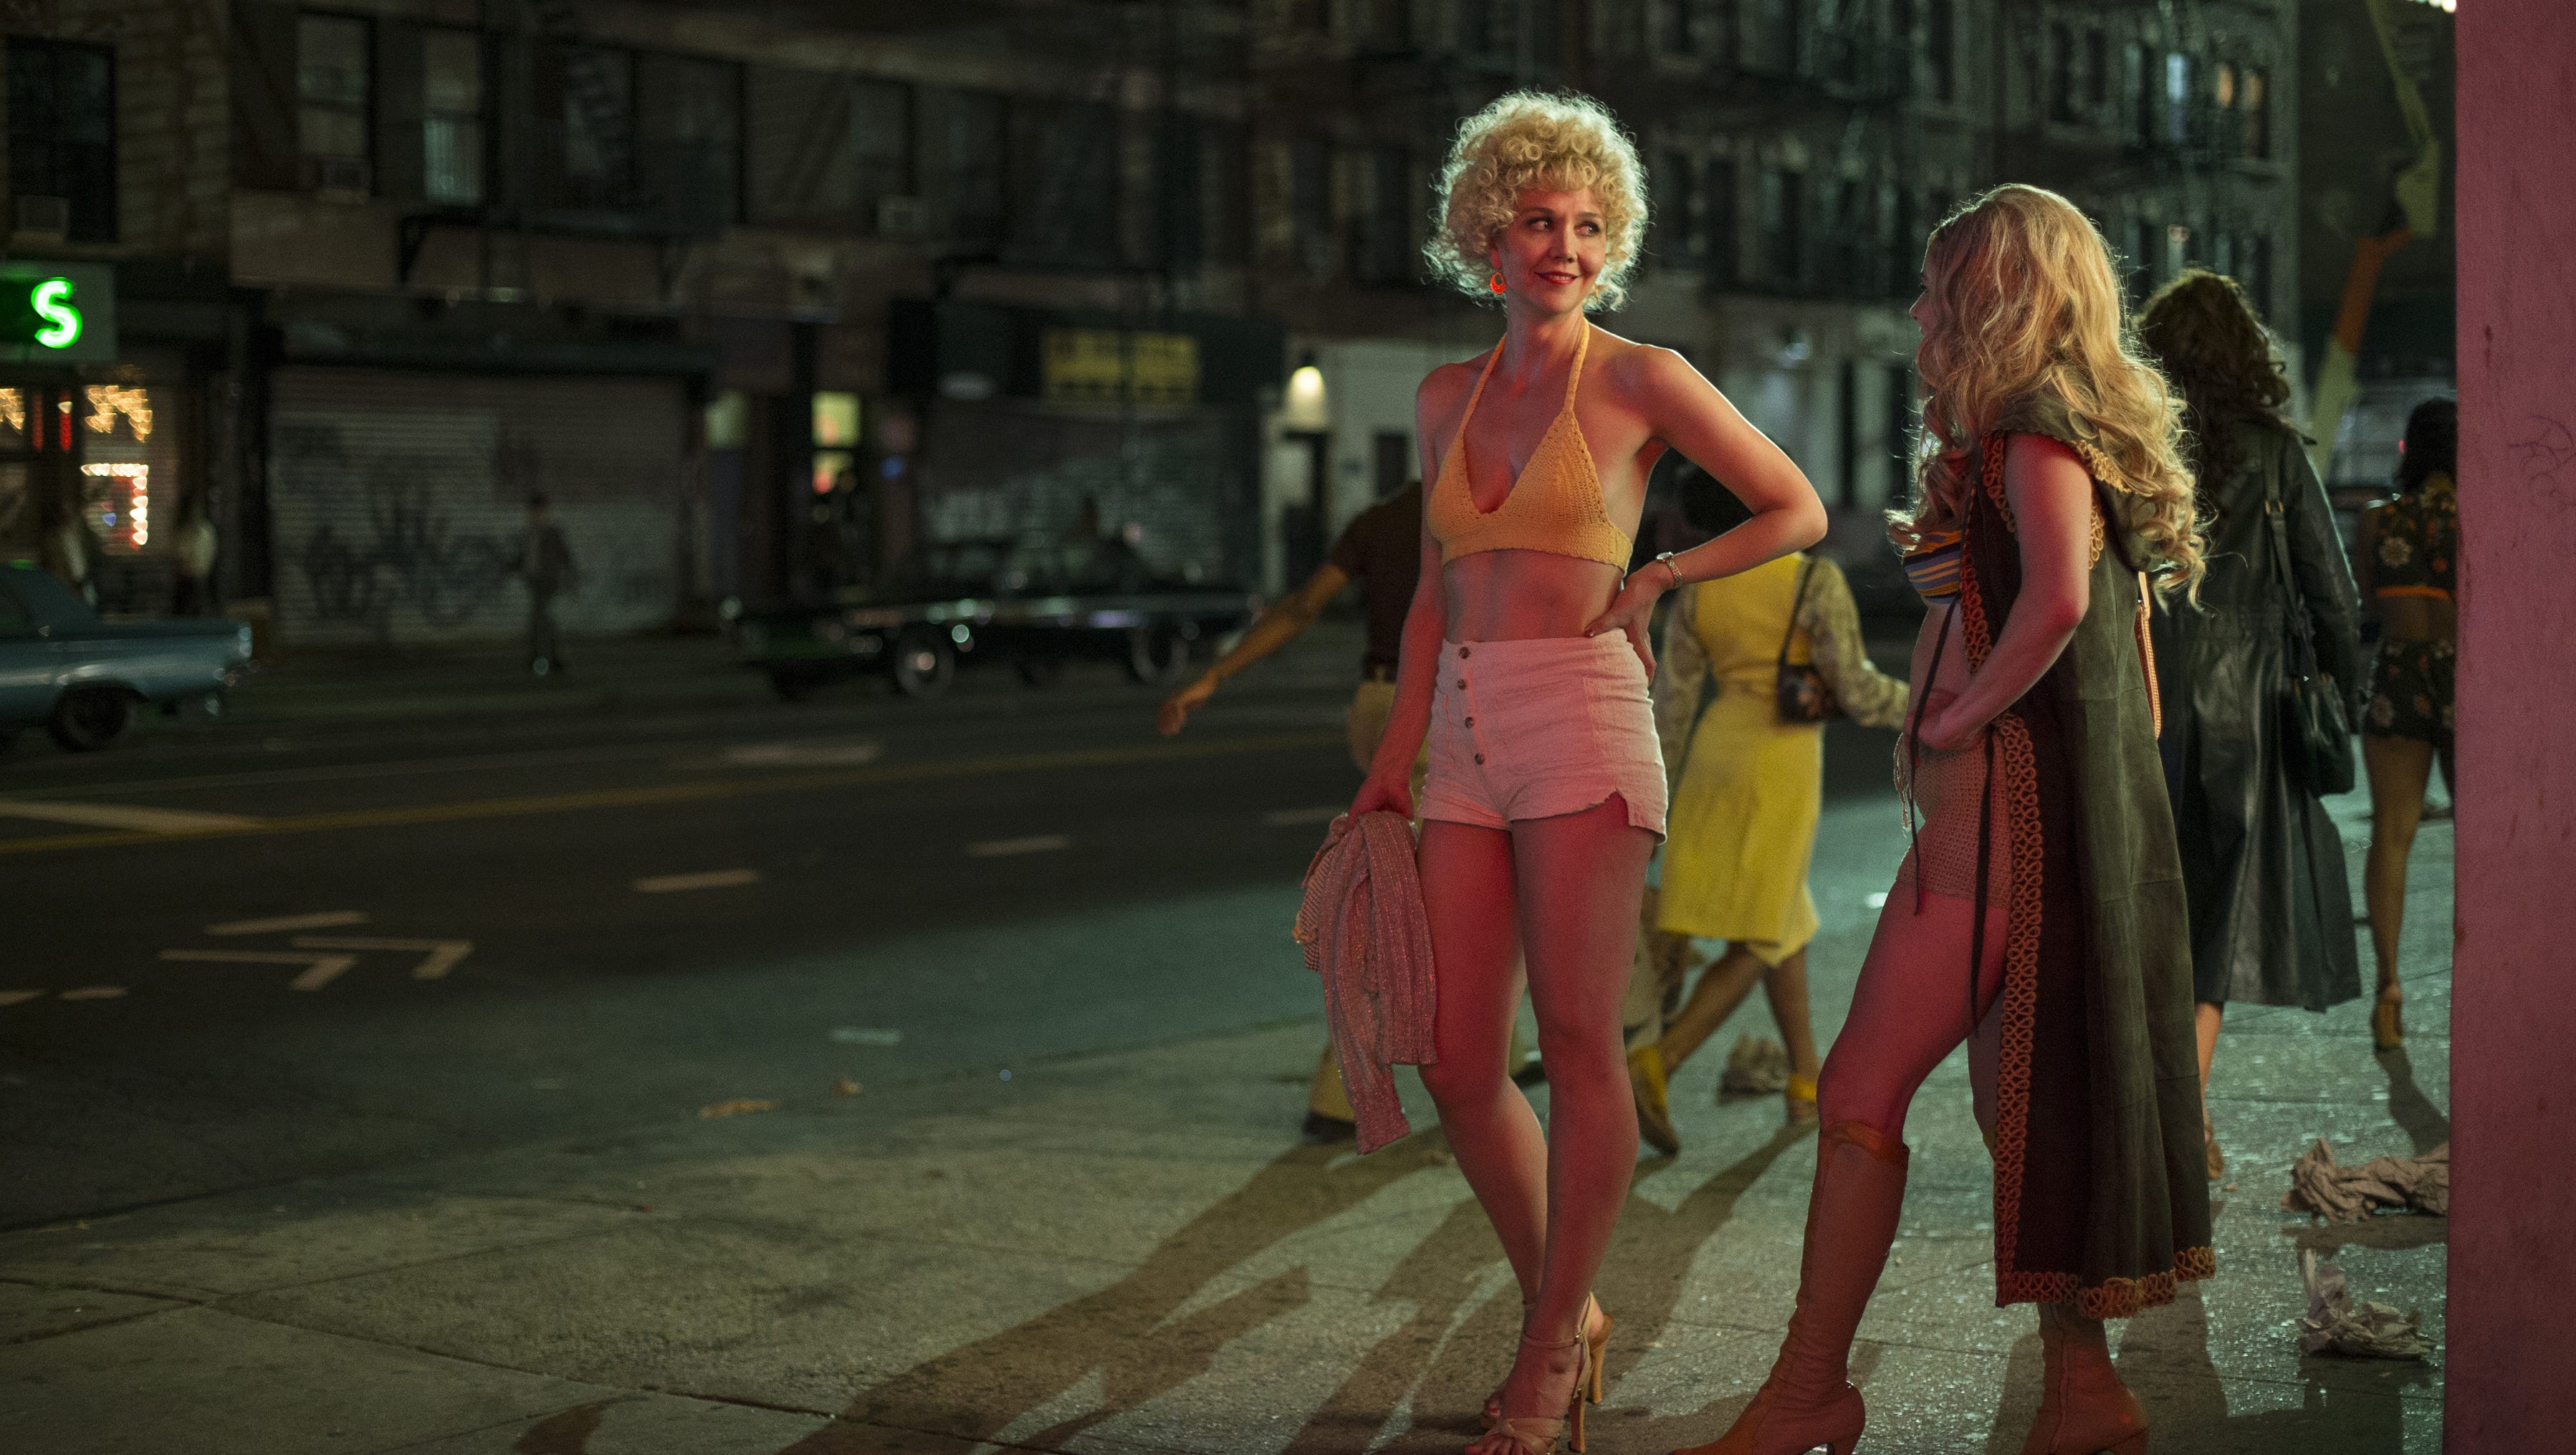 Hbo Porn Shows - HBO's 'The Deuce' is a throwback to the birth of NYC porn scene